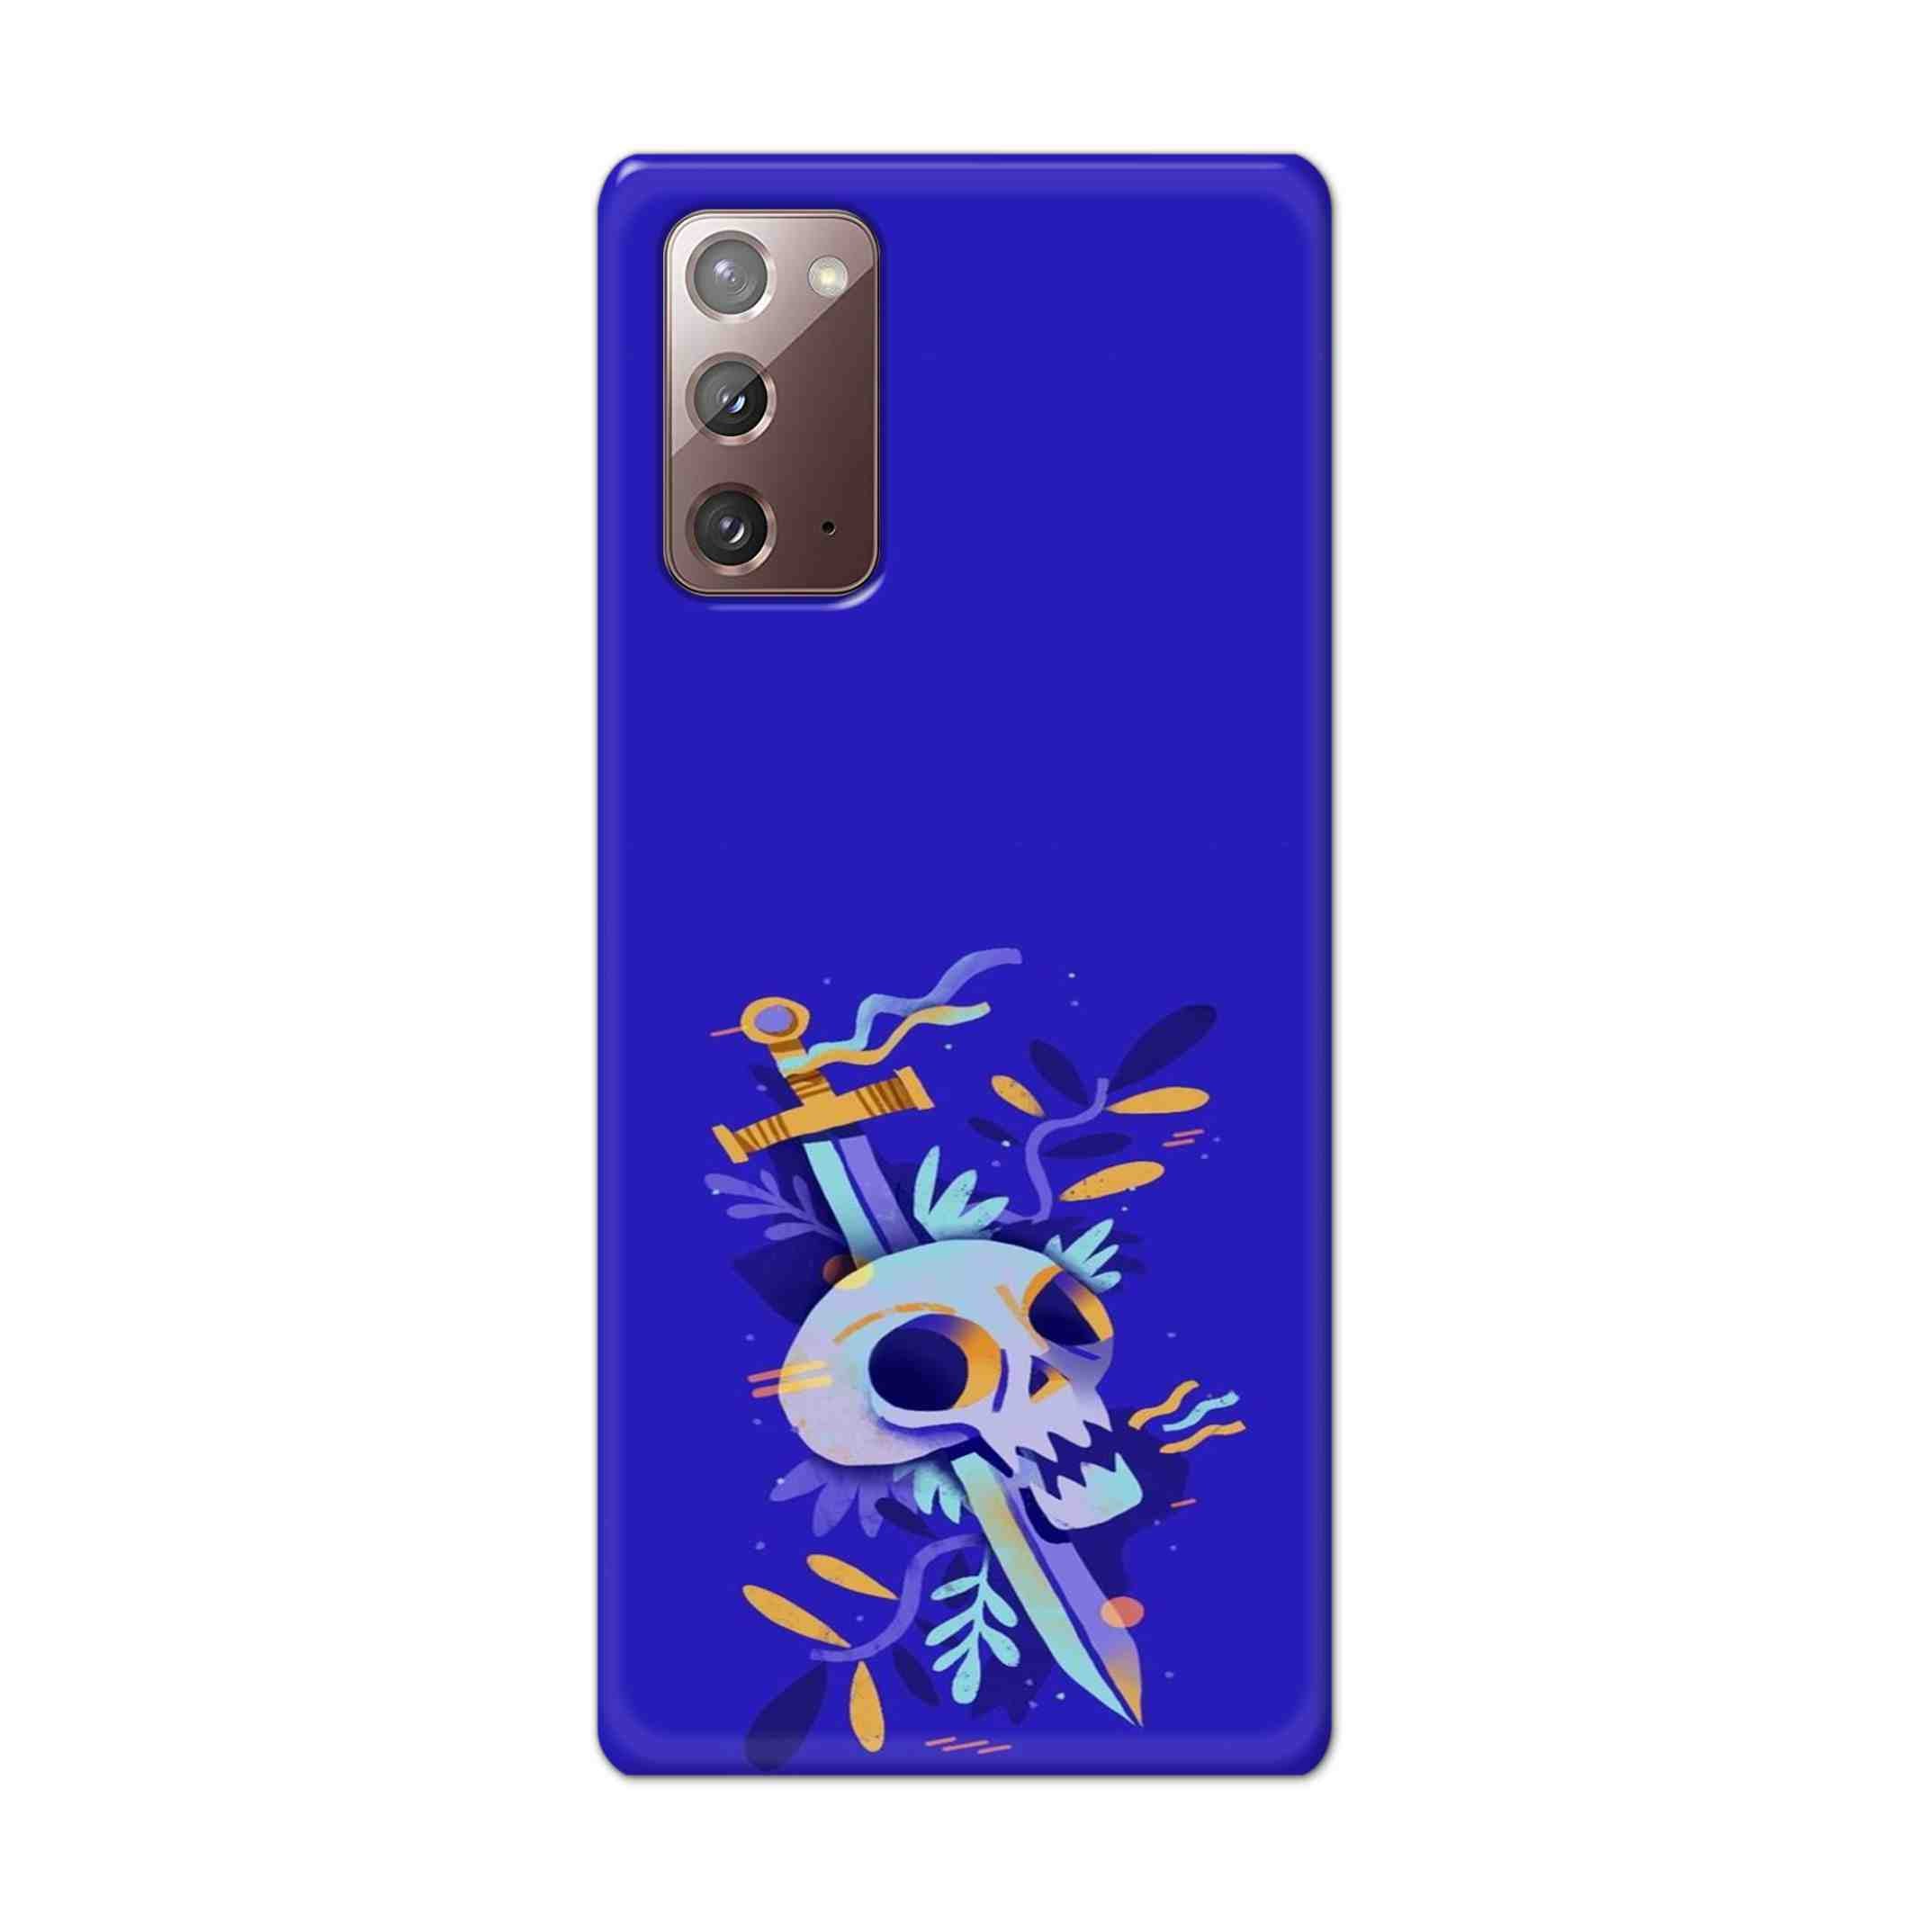 Buy Blue Skull Hard Back Mobile Phone Case Cover For Samsung Galaxy Note 20 Online